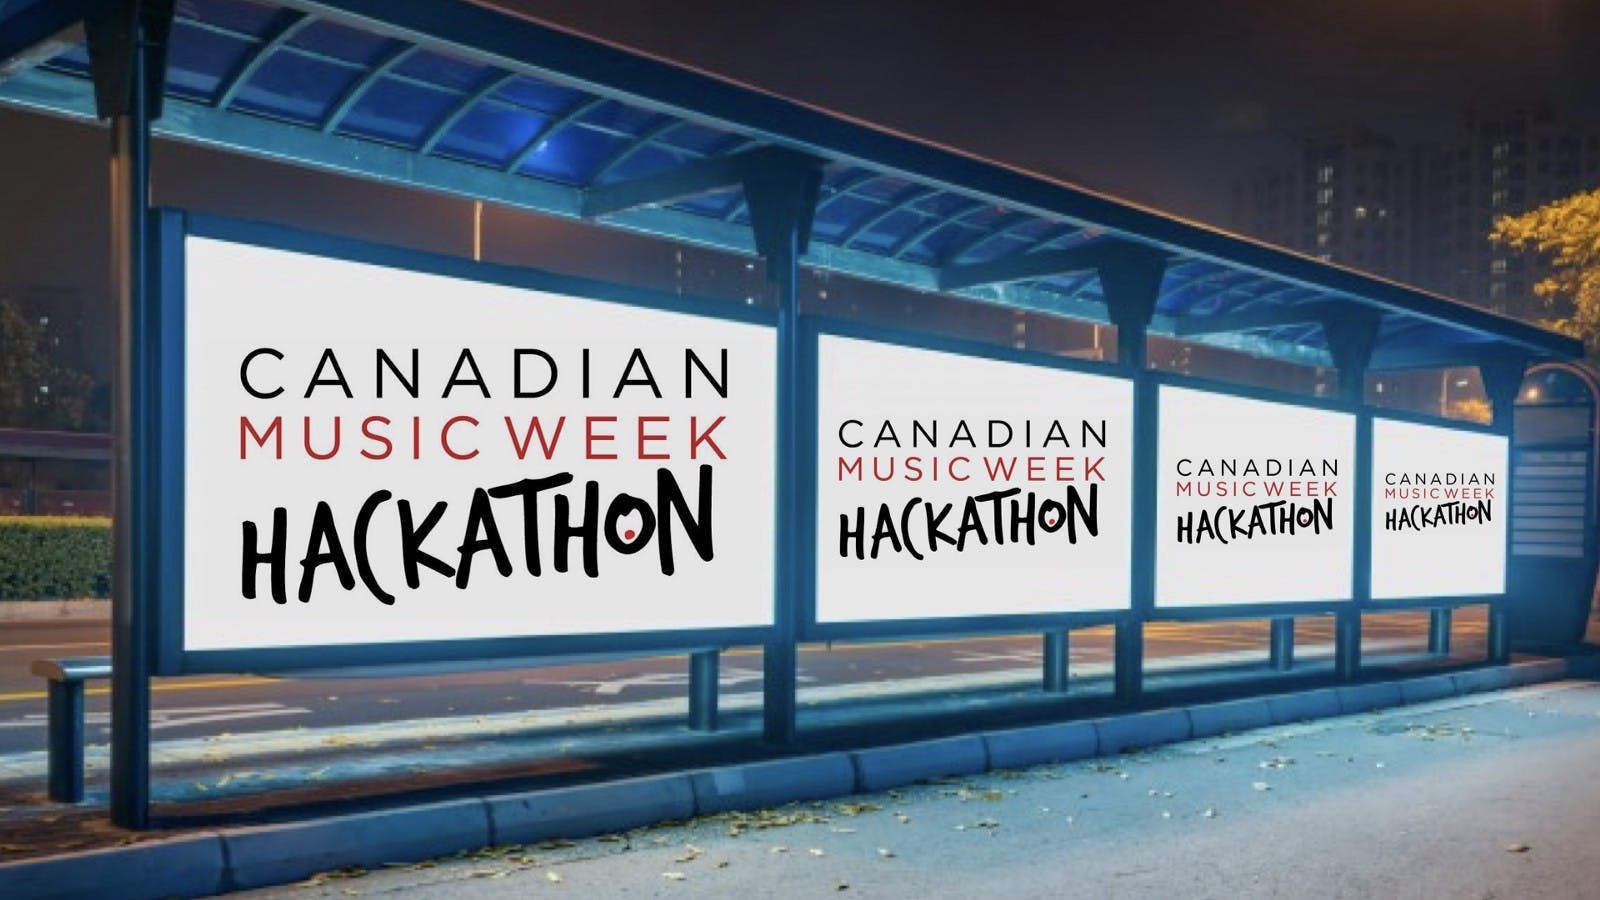 /canadian-music-week-hackathon-is-approaching-914dd392b33e feature image